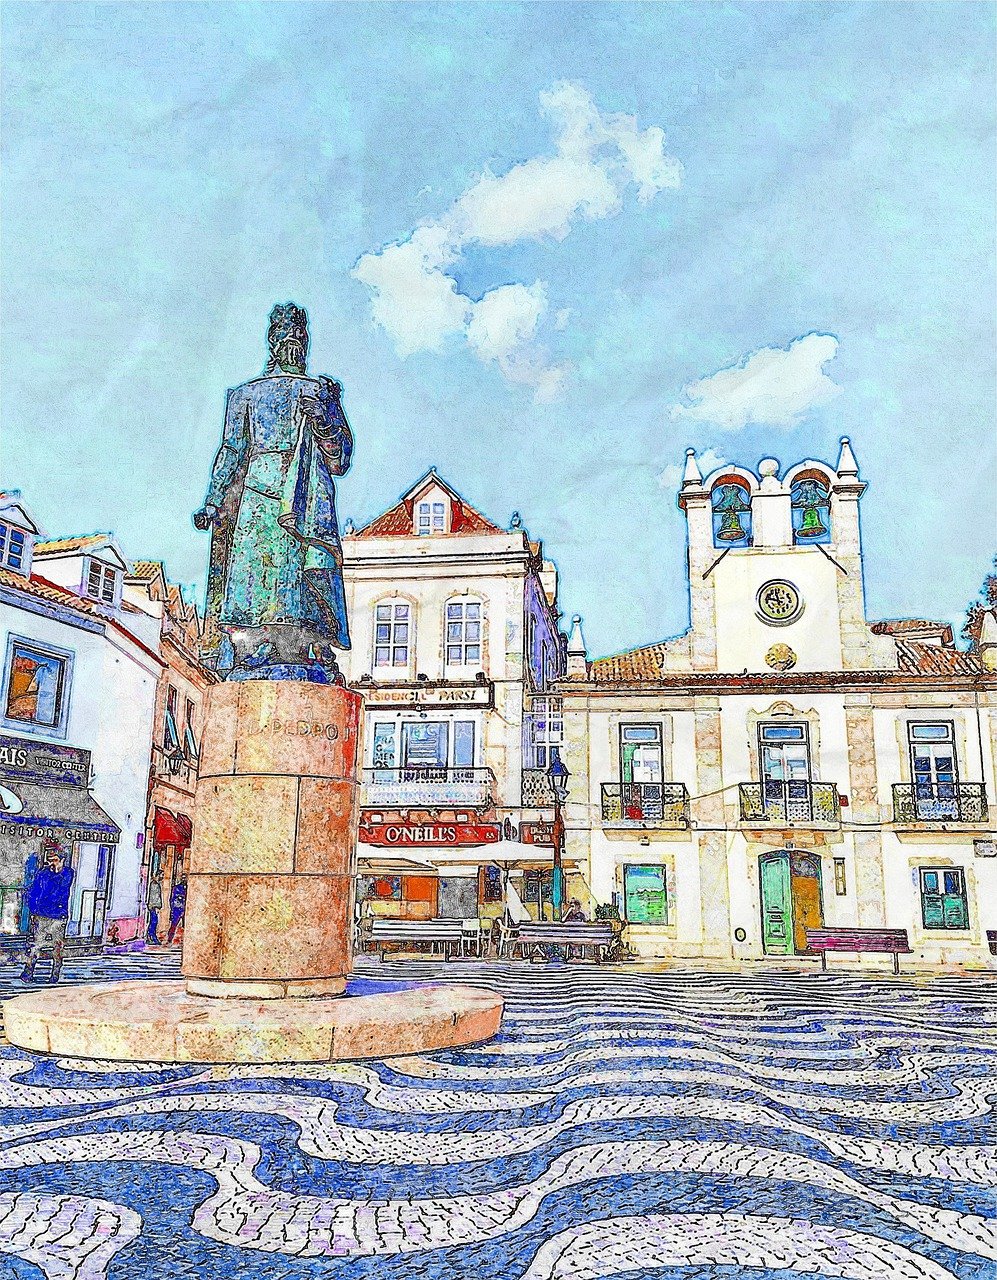 a painting of a city square with a statue, a digital painting, inspired by Amadeo de Souza Cardoso, digital art, nazare (portugal), postprocessed, an beautiful, mottled coloring